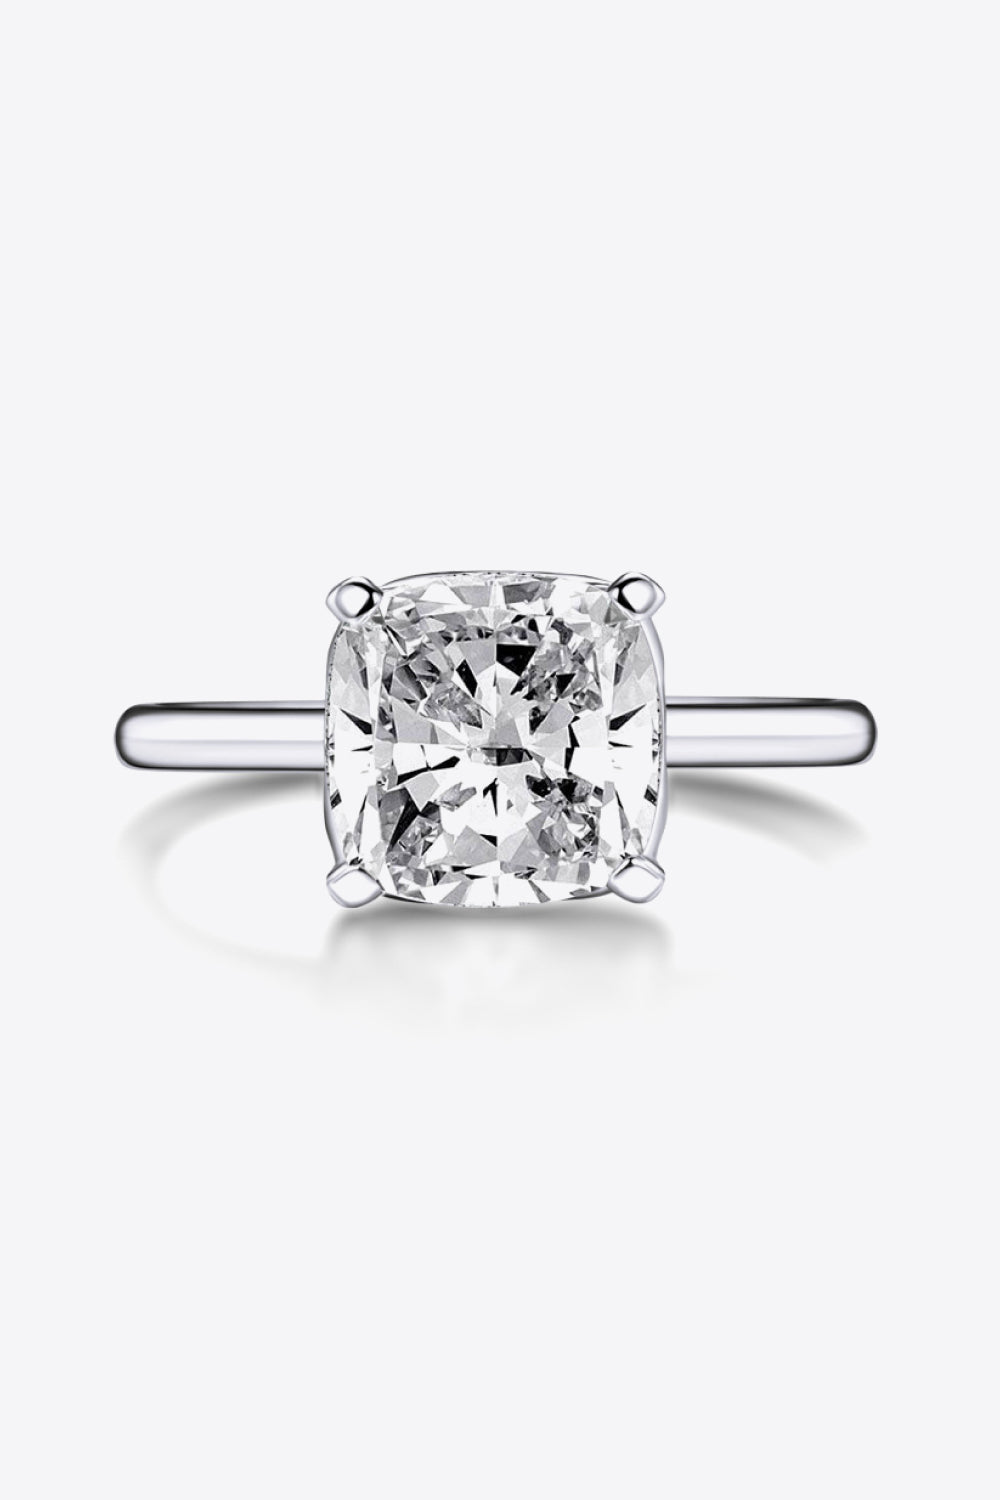 3.5 Carat Zircon 4-Prong Ring-Rings-Inspired by Justeen-Women's Clothing Boutique in Chicago, Illinois